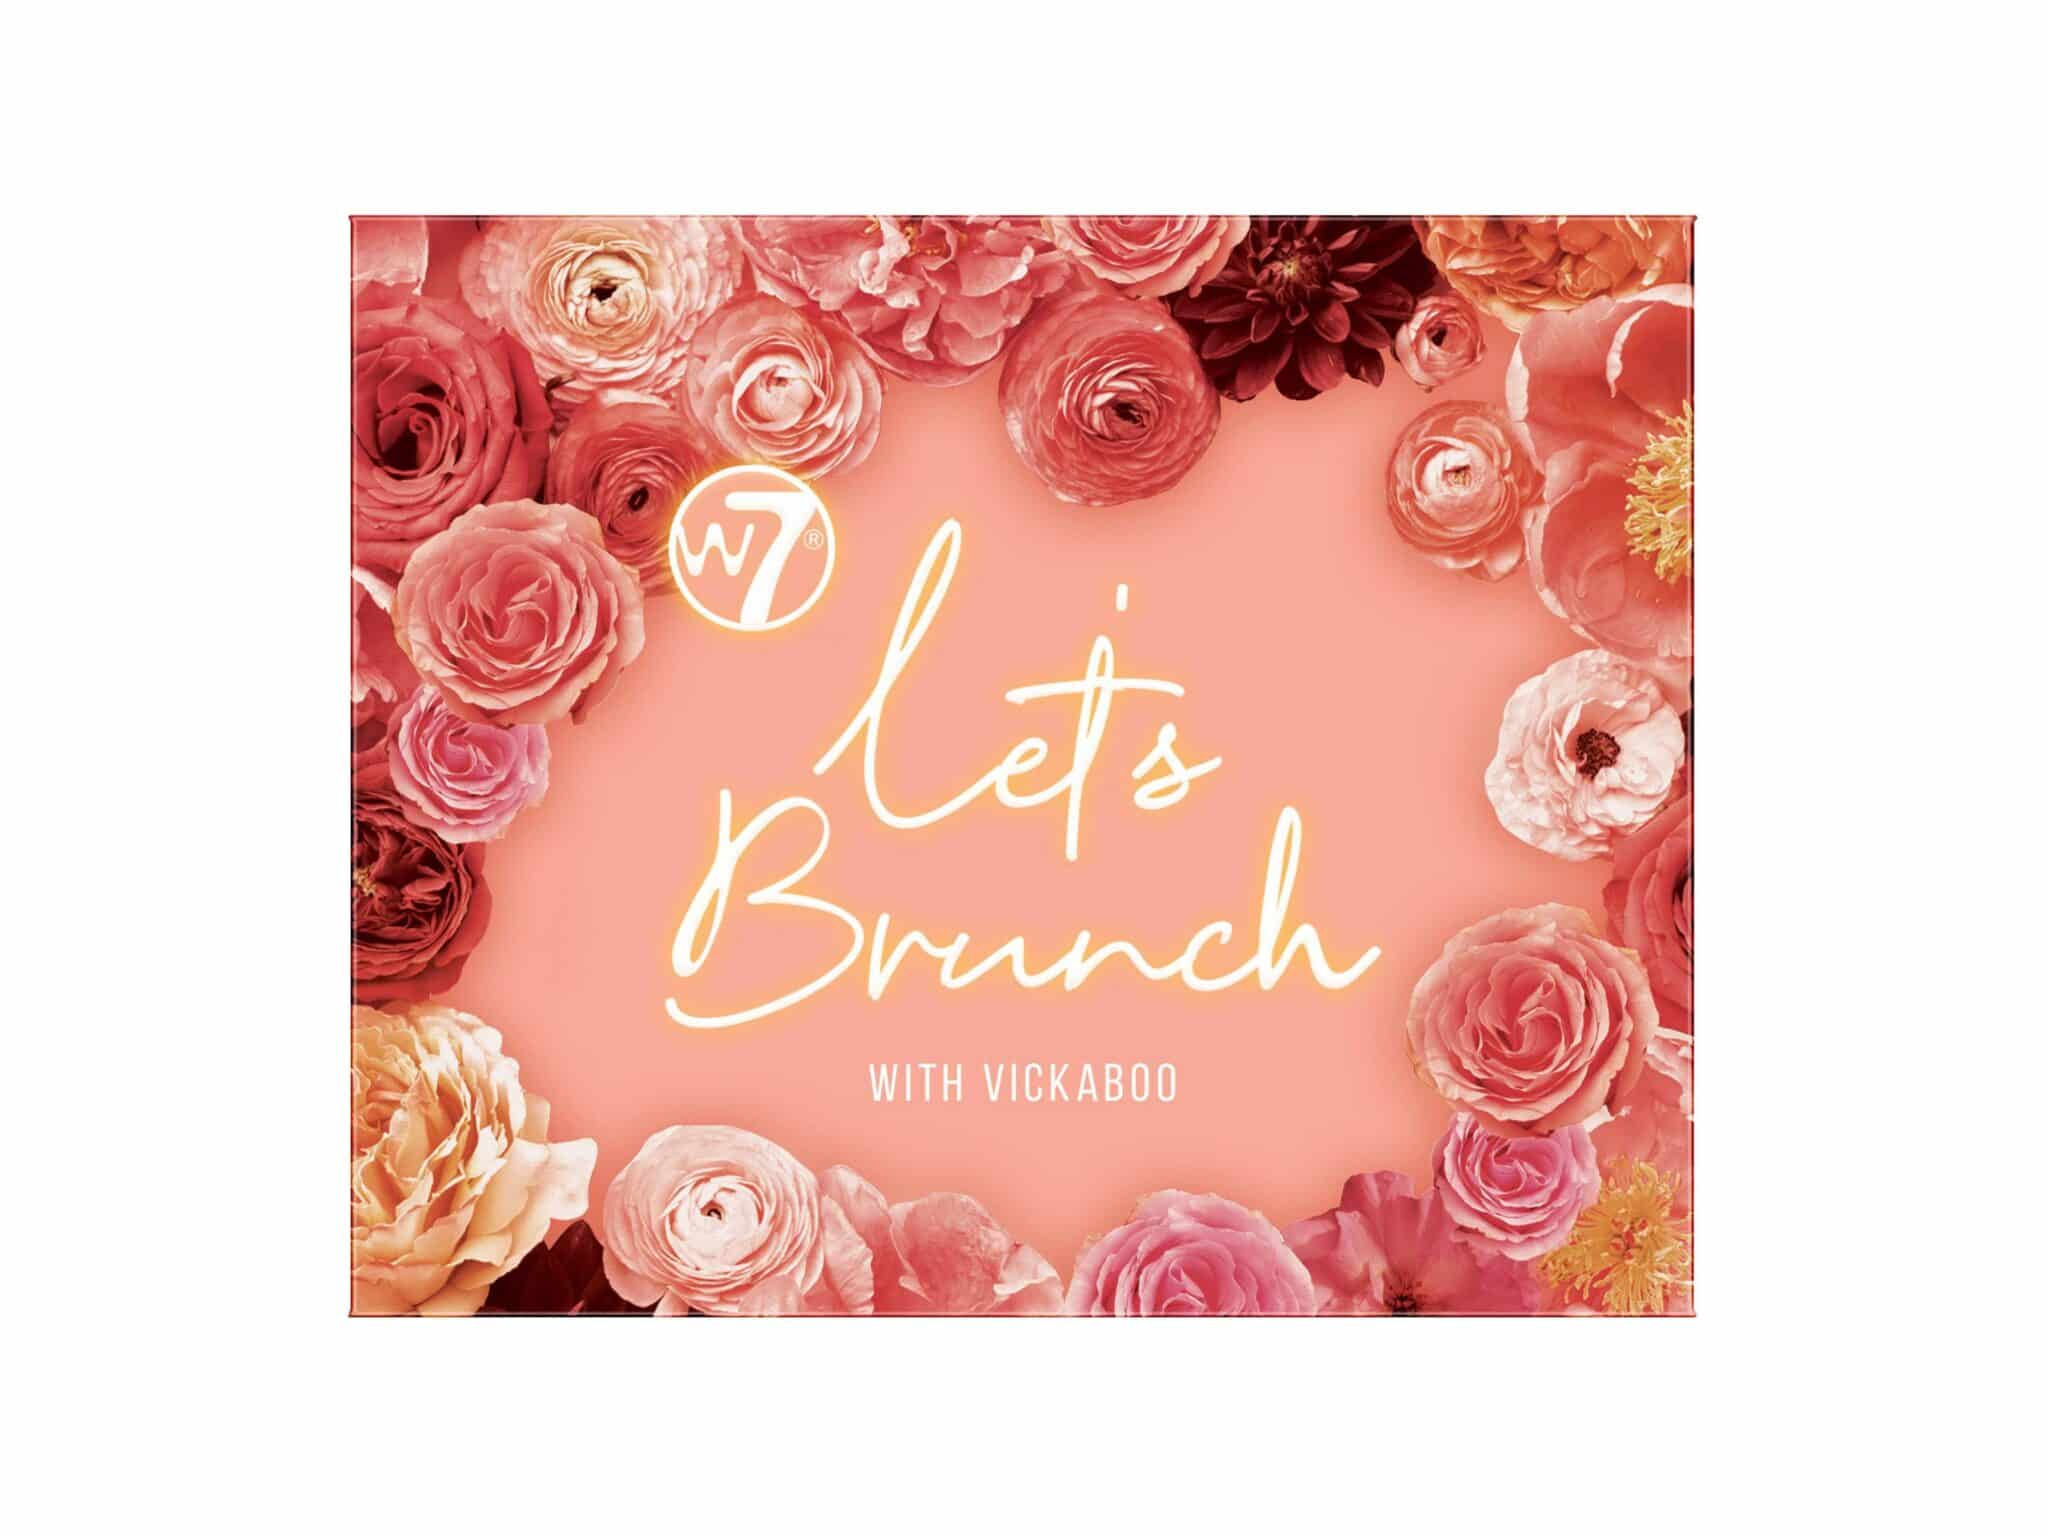 W7 let's brunch with vickaboo pressed pigment eye palette